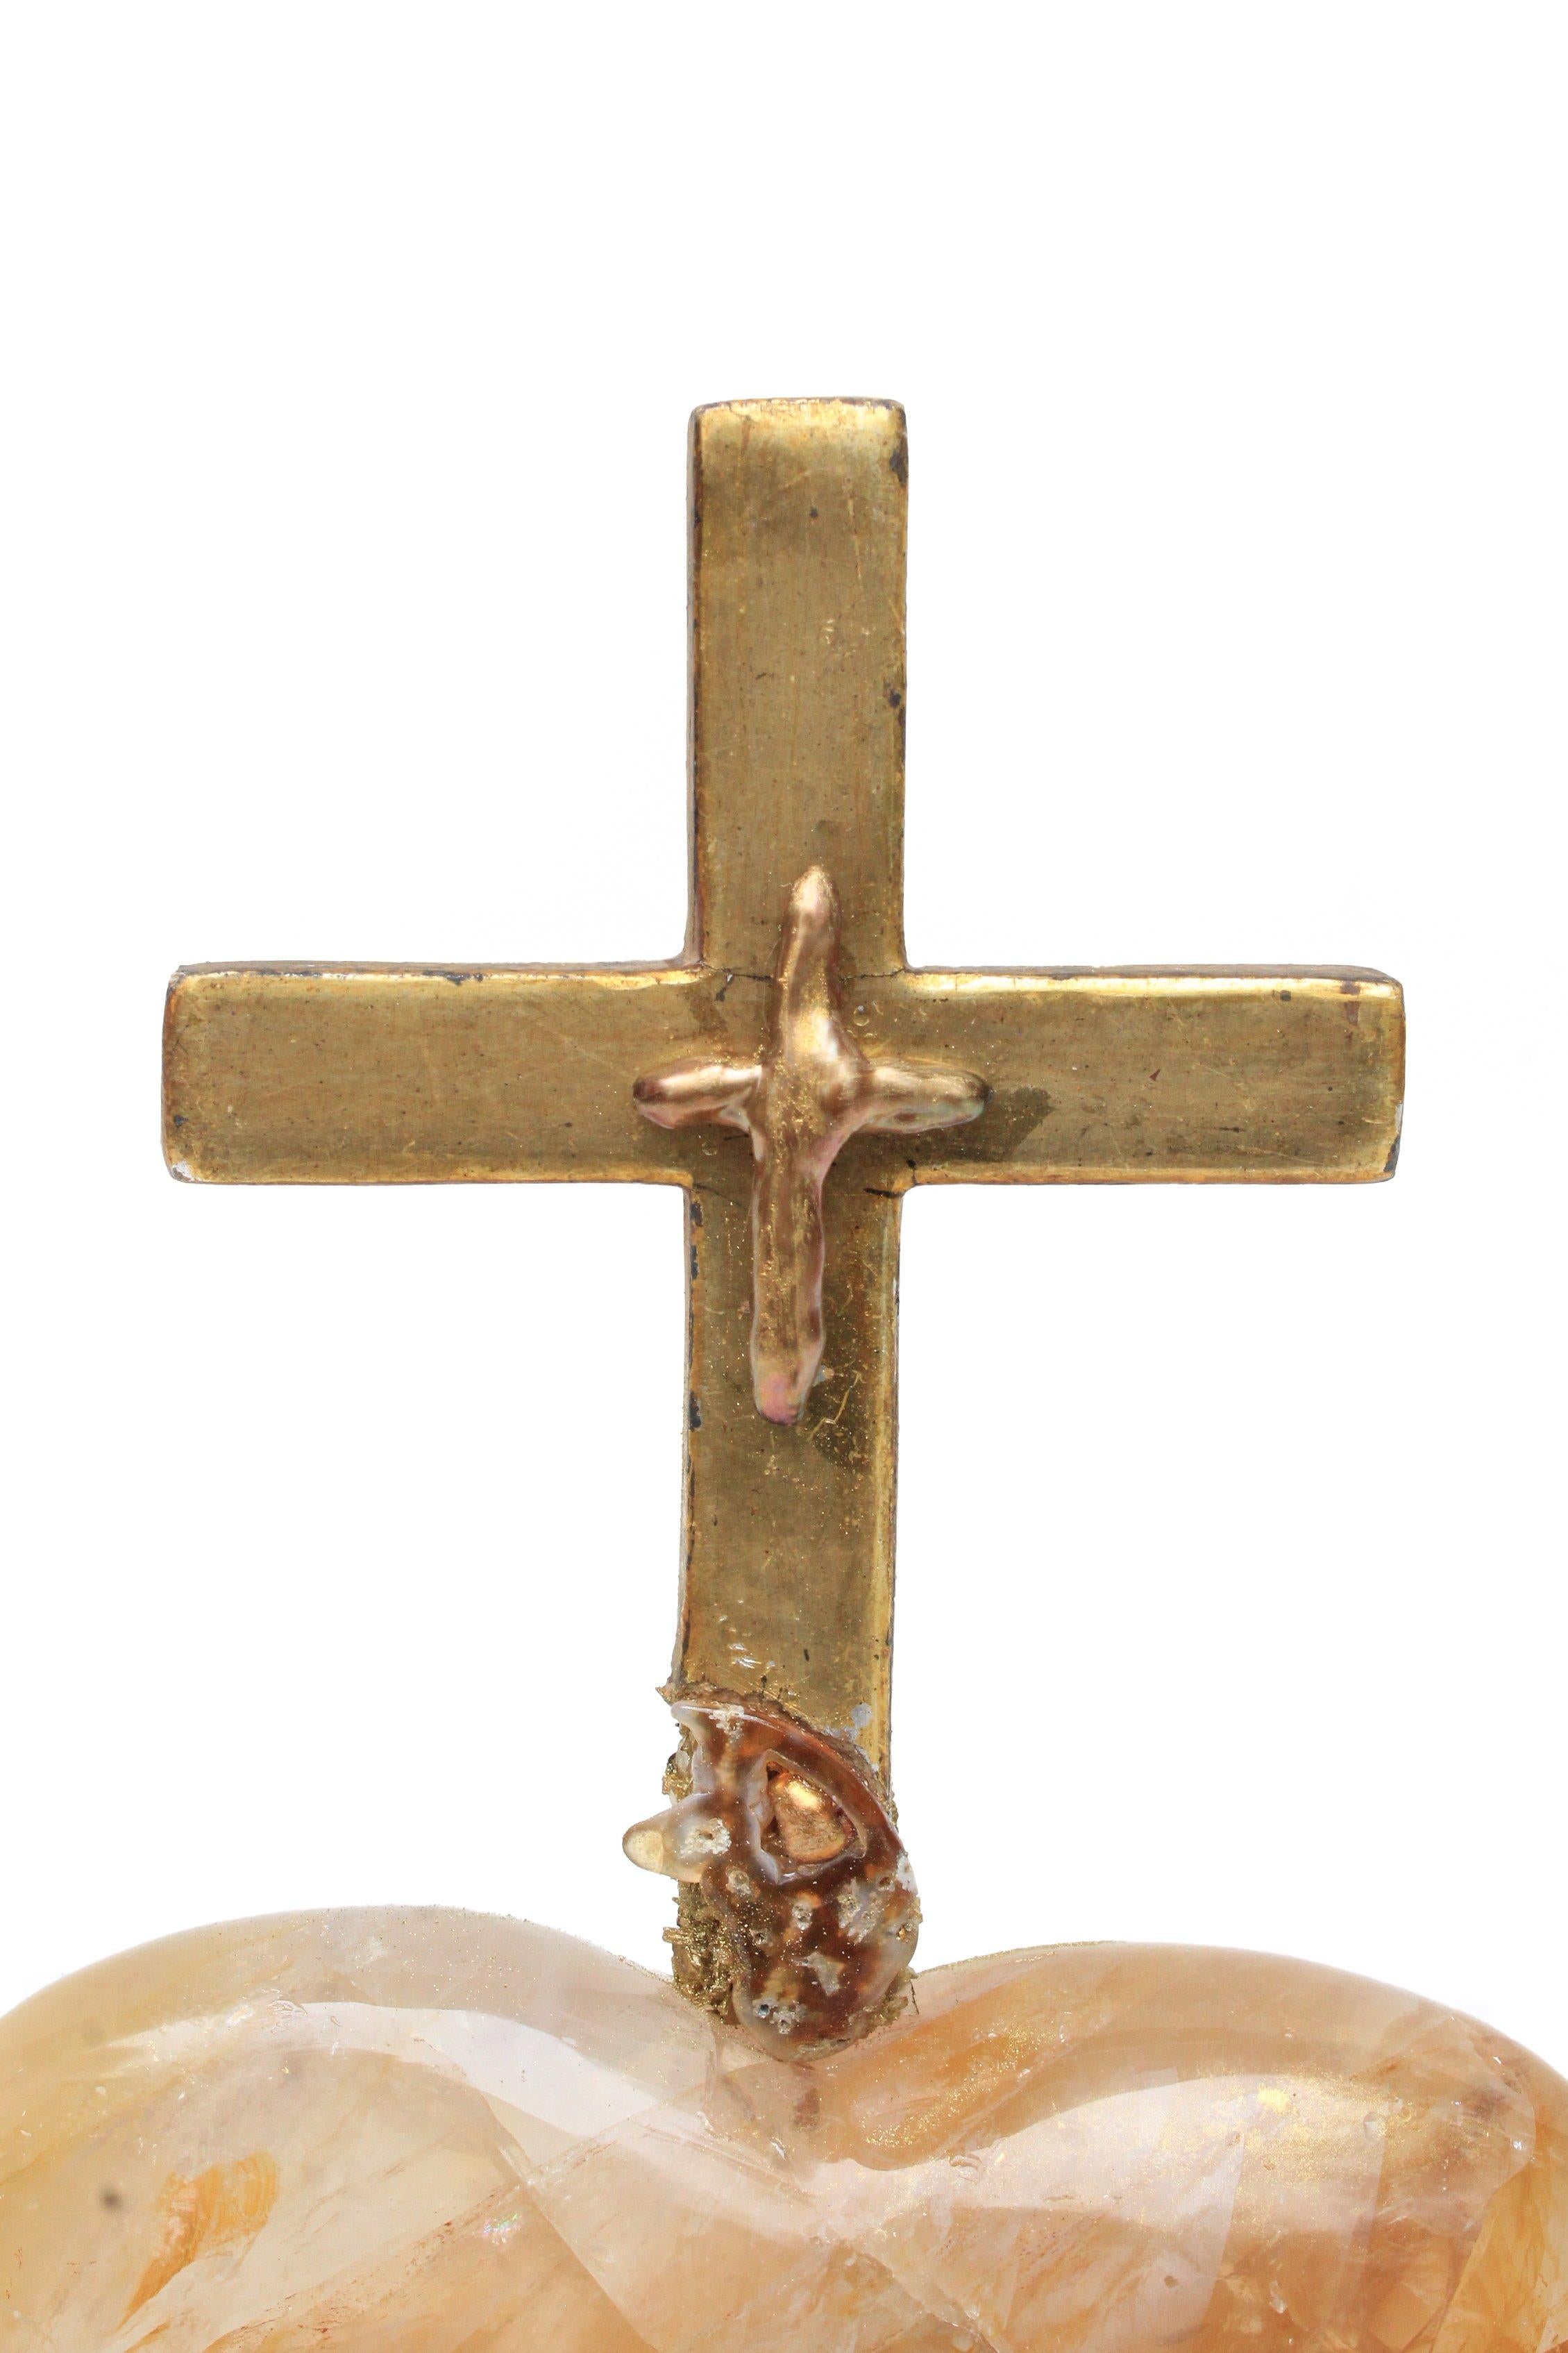 18th Century Italian cross mounted on a polished yellow hematoid quartz heart and adorned with natural-forming baroque pearls and a cross-shaped baroque pearl. The piece is inspired by 